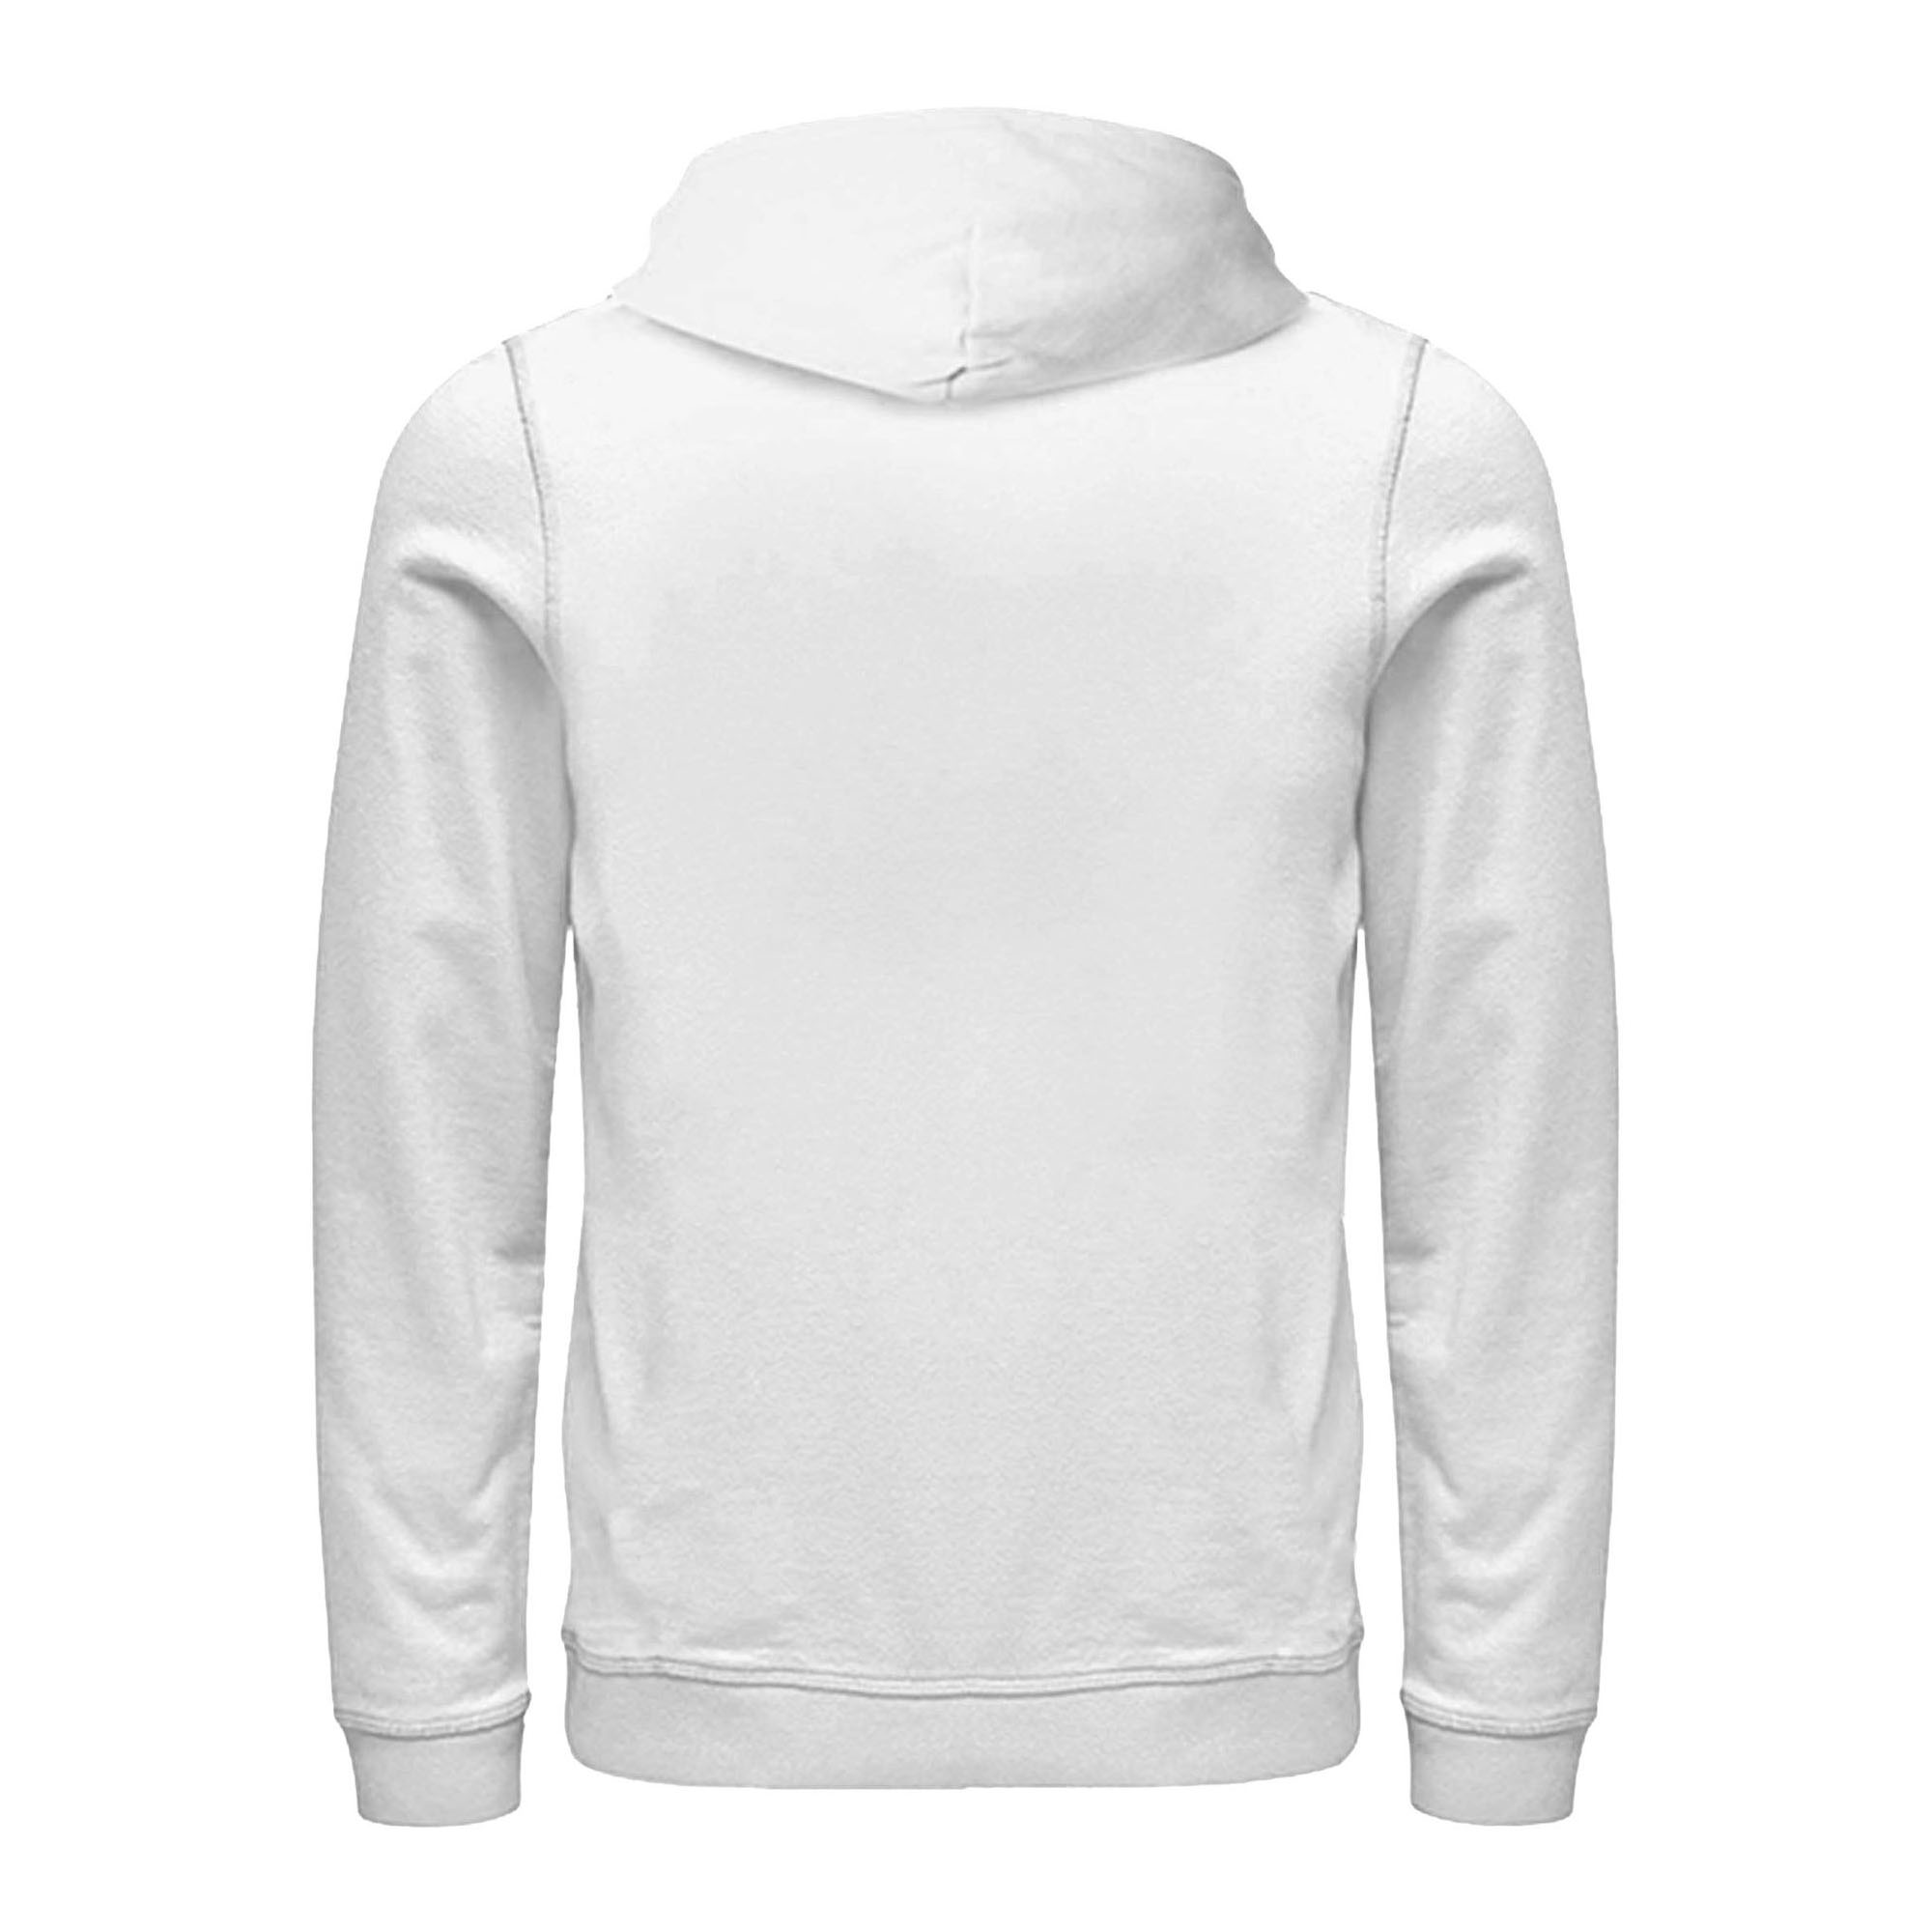 Psychic psychedelic trippy cat White Graphic Pullover Hoodie - Design ...